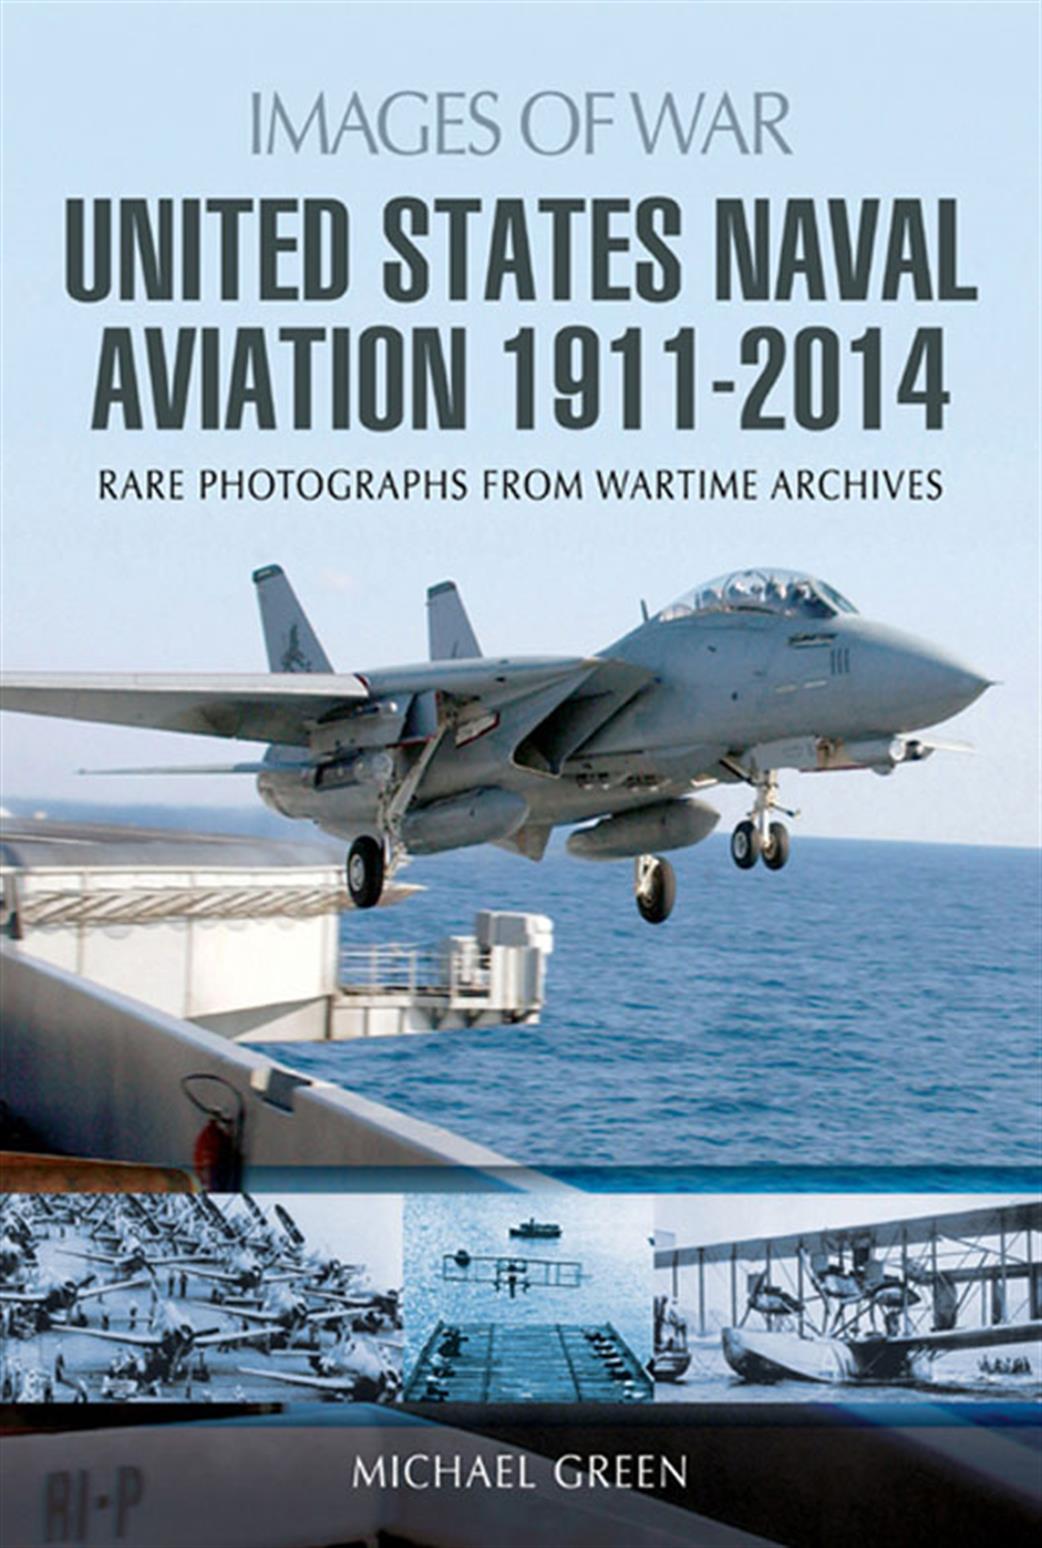 Pen & Sword  1473822254 Images of War United States Naval Aviation 1911-2014 Book By Michael Green